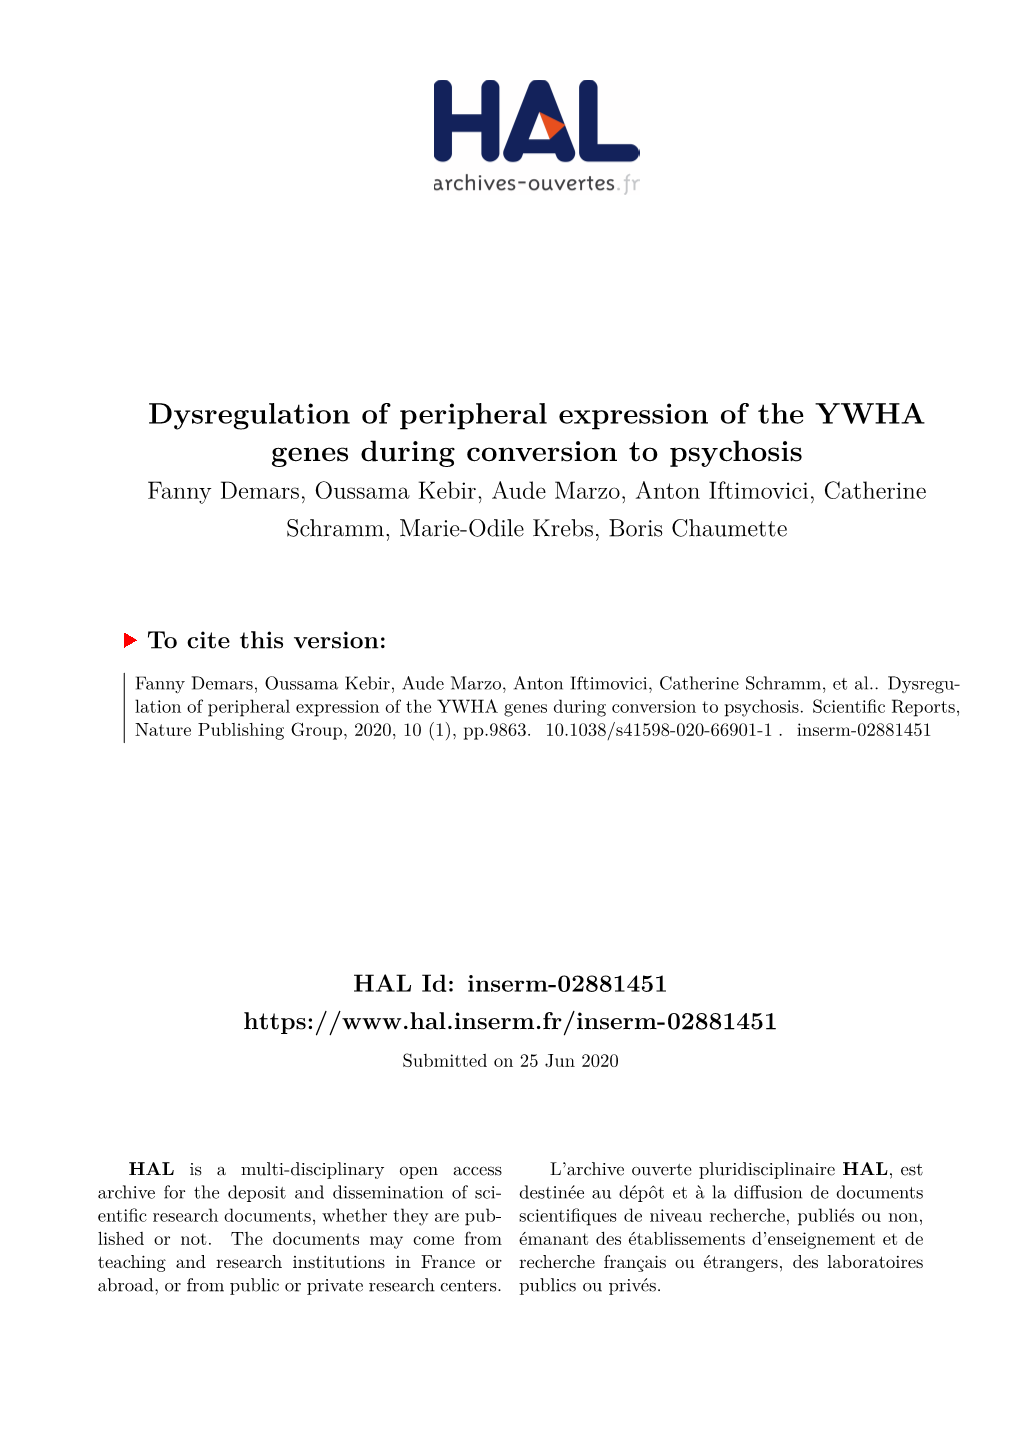 Dysregulation of Peripheral Expression of the YWHA Genes